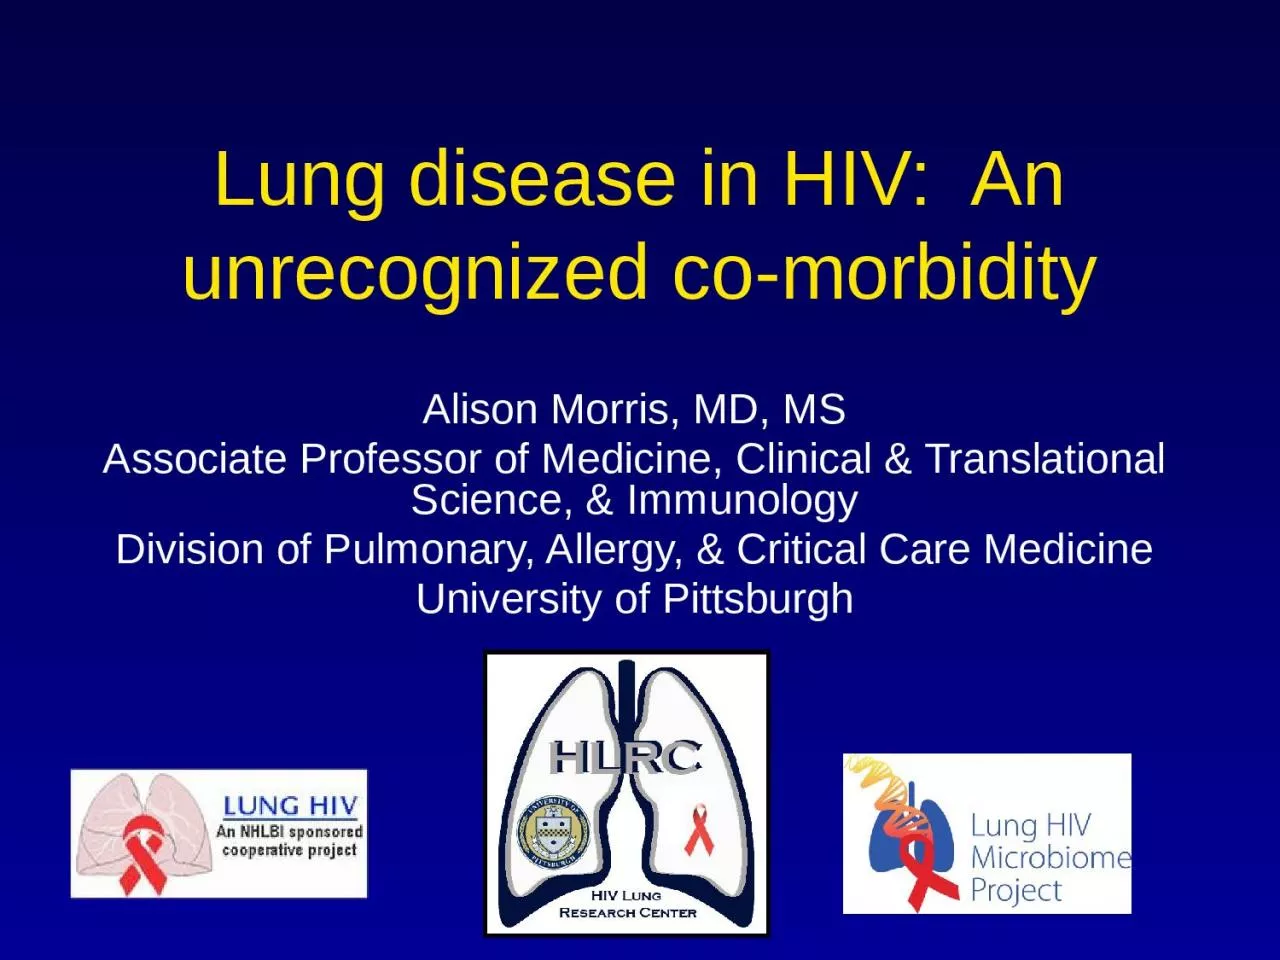 Lung disease in HIV:  An unrecognized co-morbidity